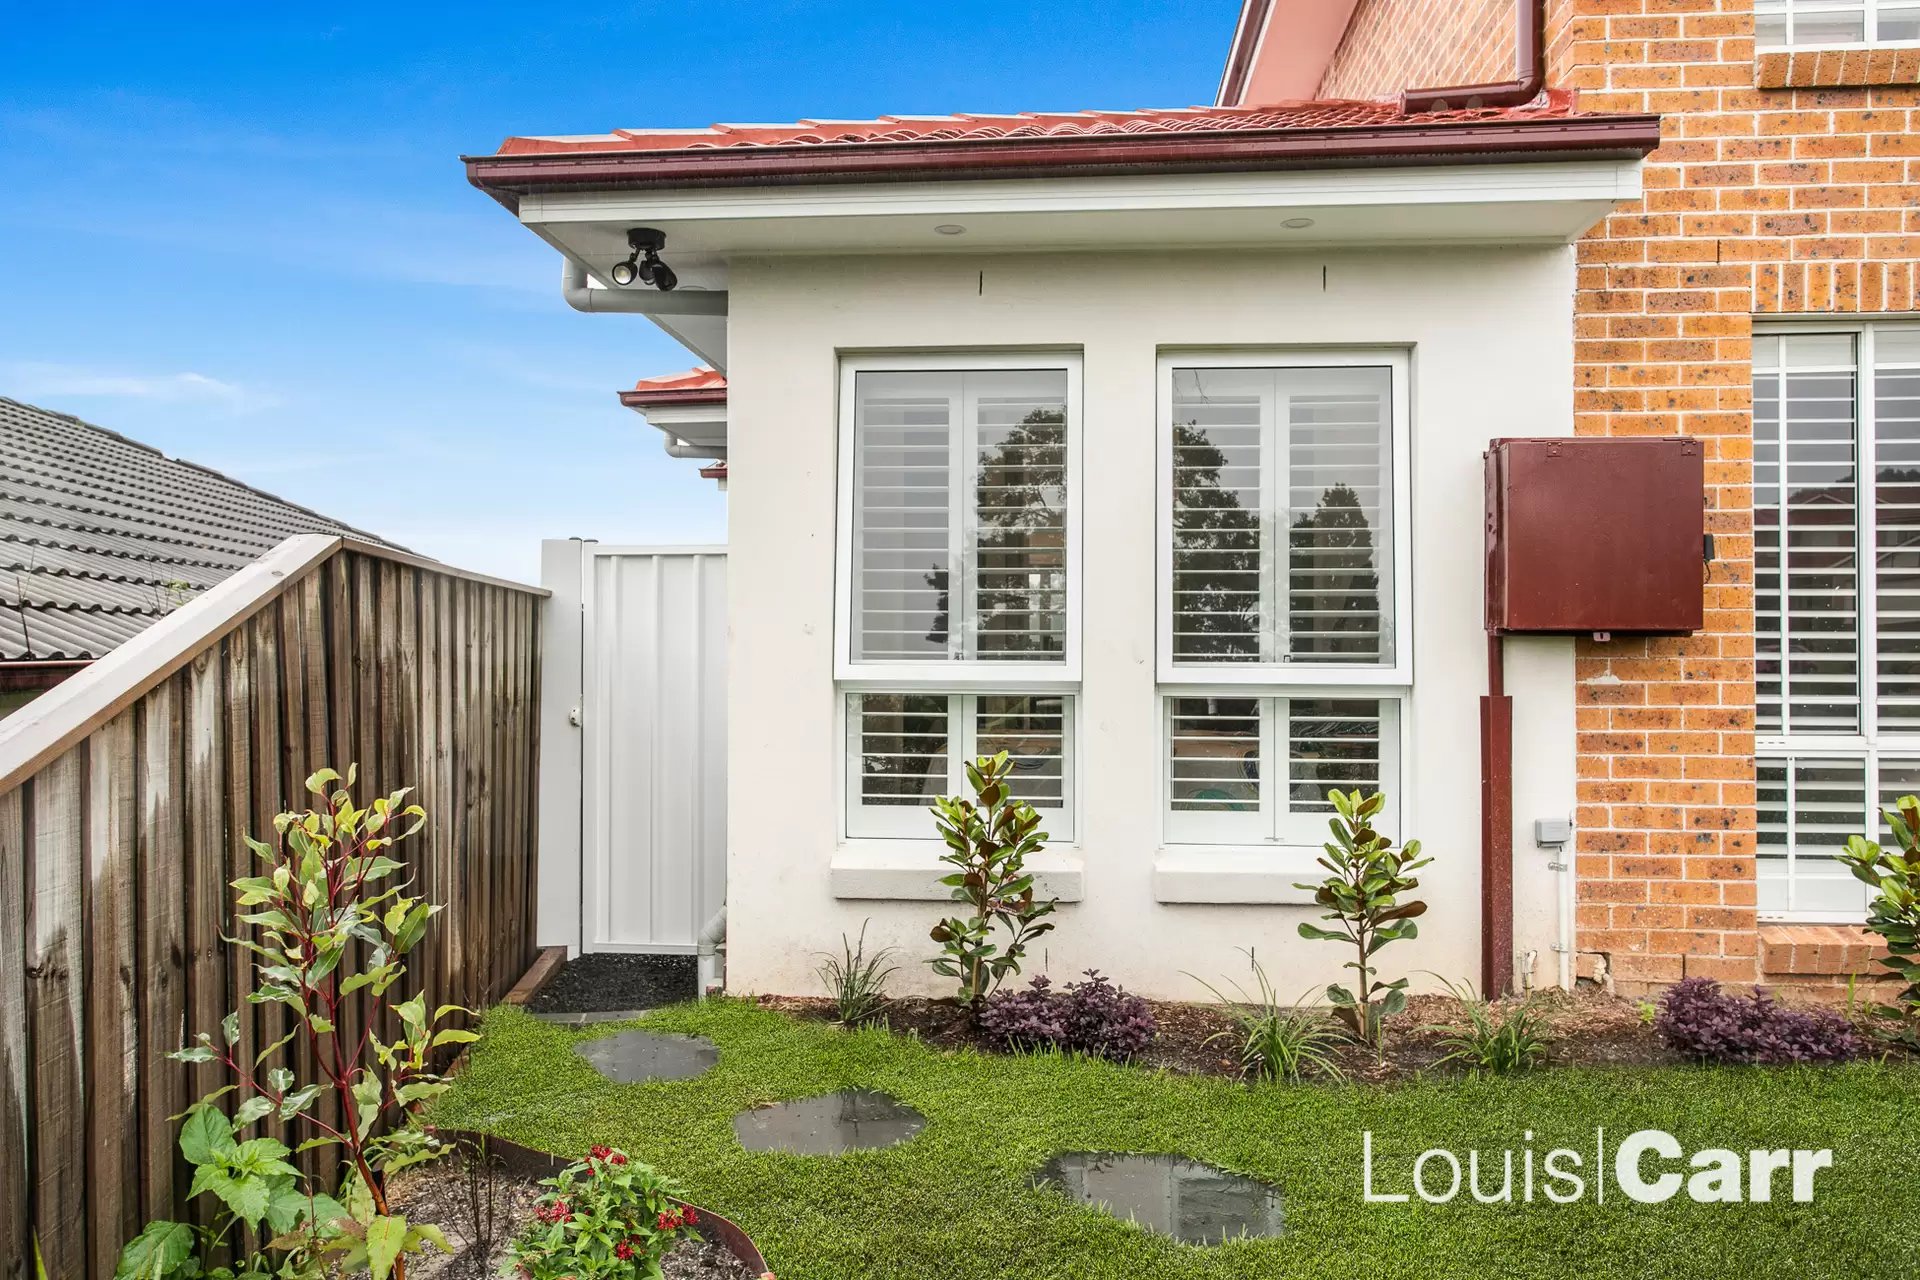 Photo #1: 23A Forest Close, Cherrybrook - Leased by Louis Carr Real Estate